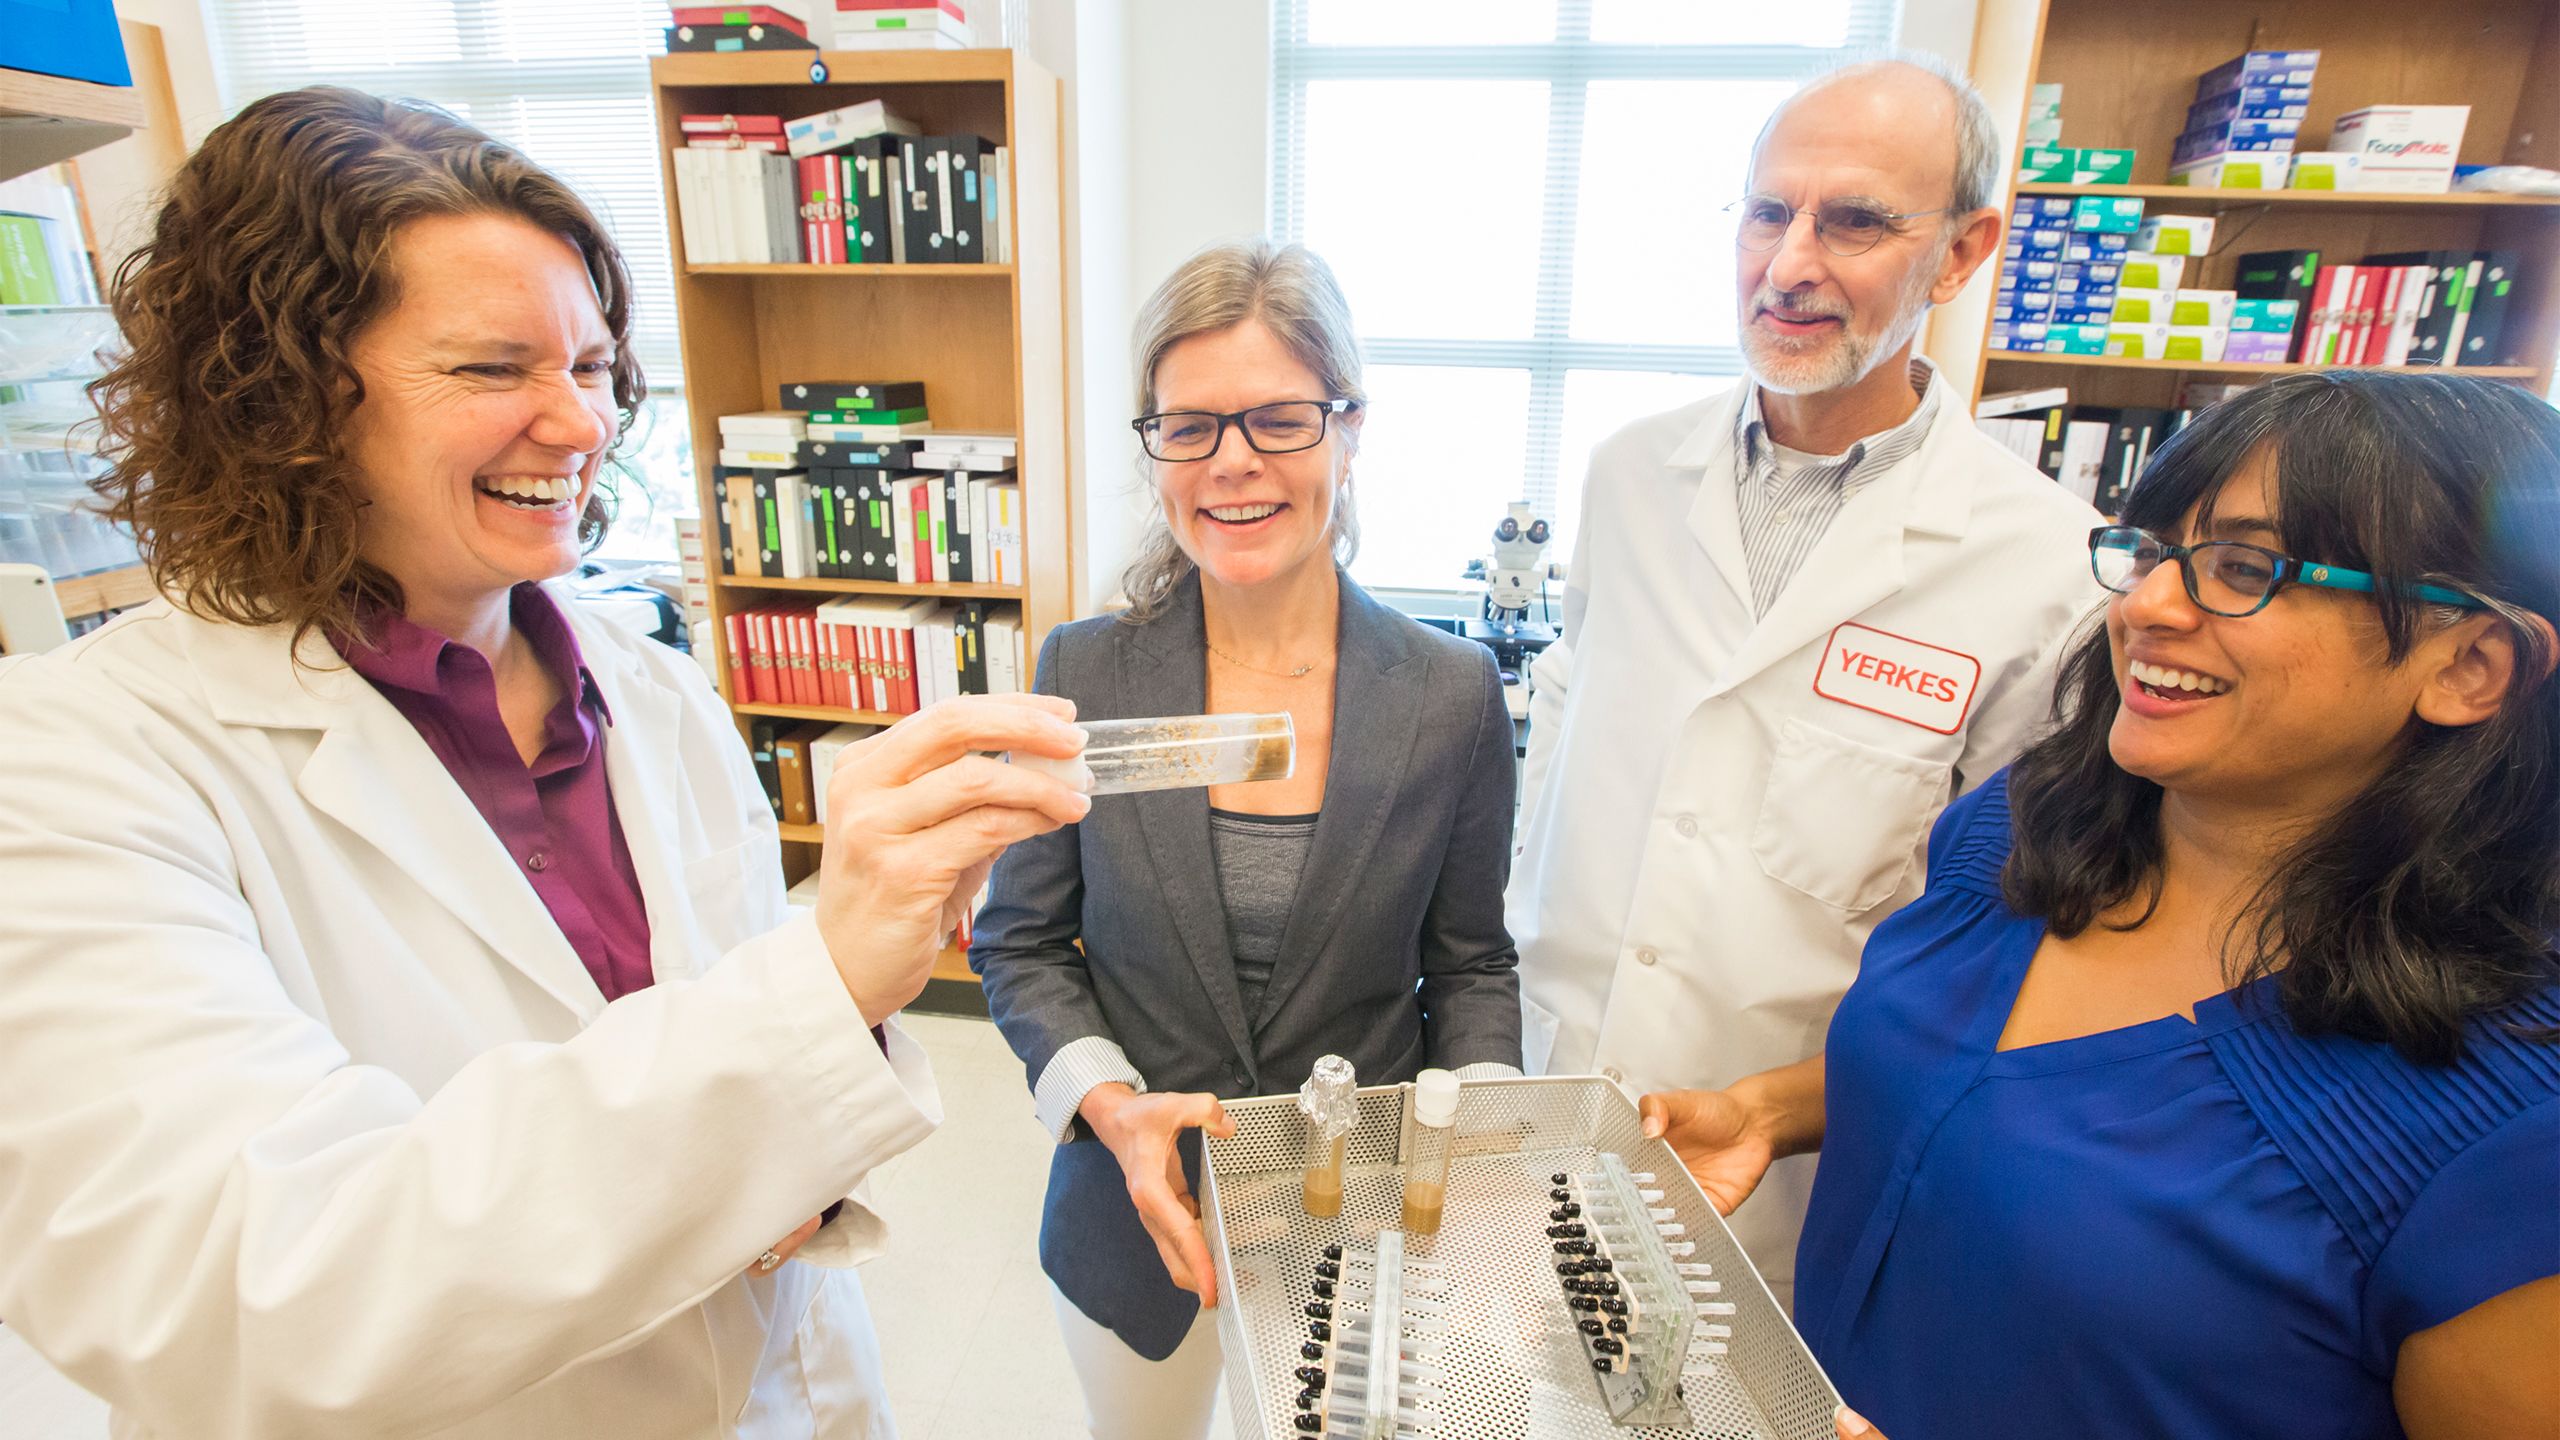 Emory scientists Amanda Freeman, wearing a white lab coat, shows a glass vial to playwright Margaret Baldwin, professor Lary Walker and playwright Natasha Patel.